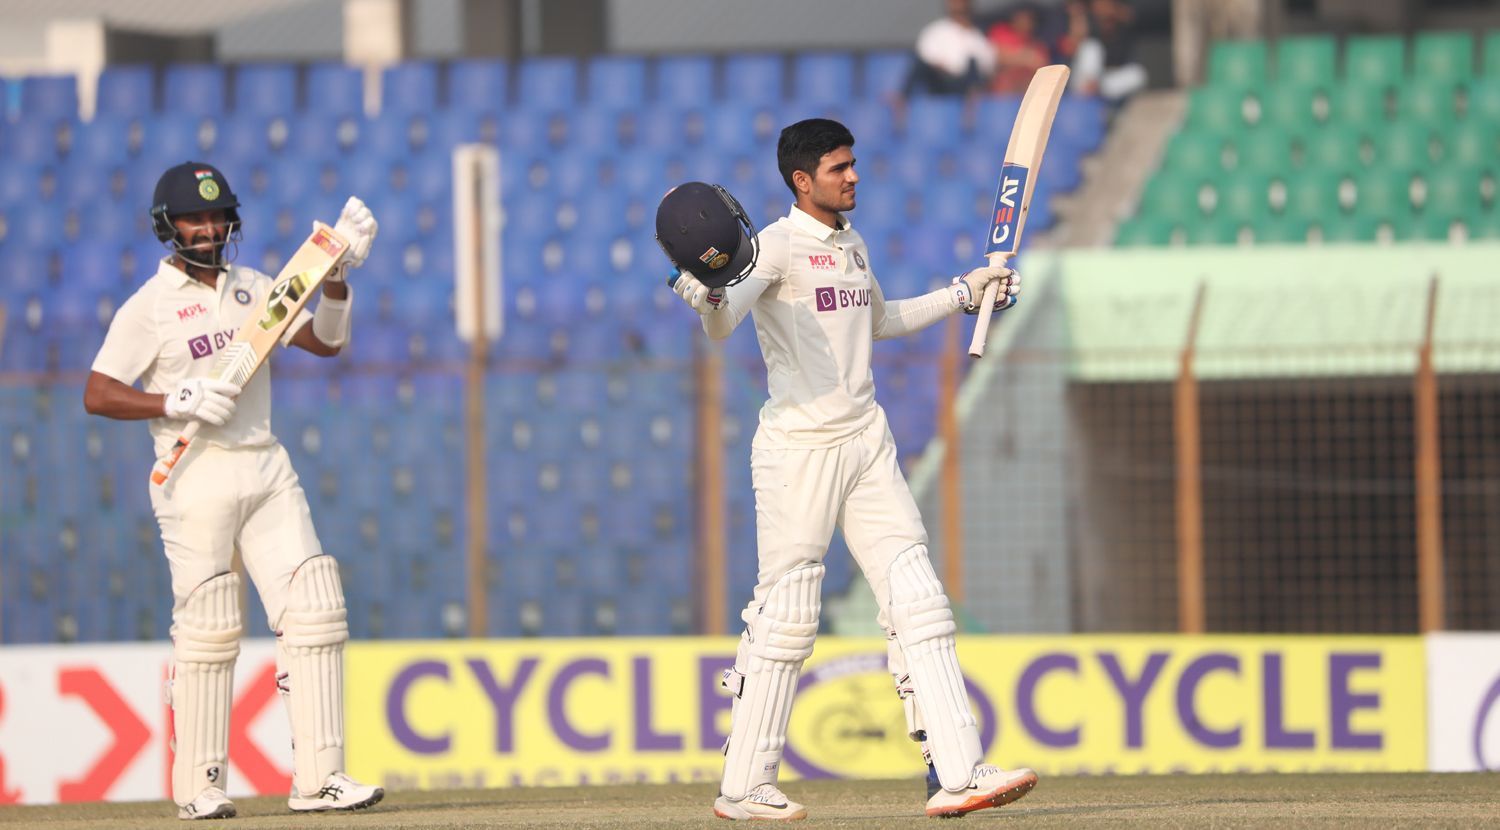 Shubman Gill scored his maiden Test century in the first match against Bangladesh. [P/C: BCCI]